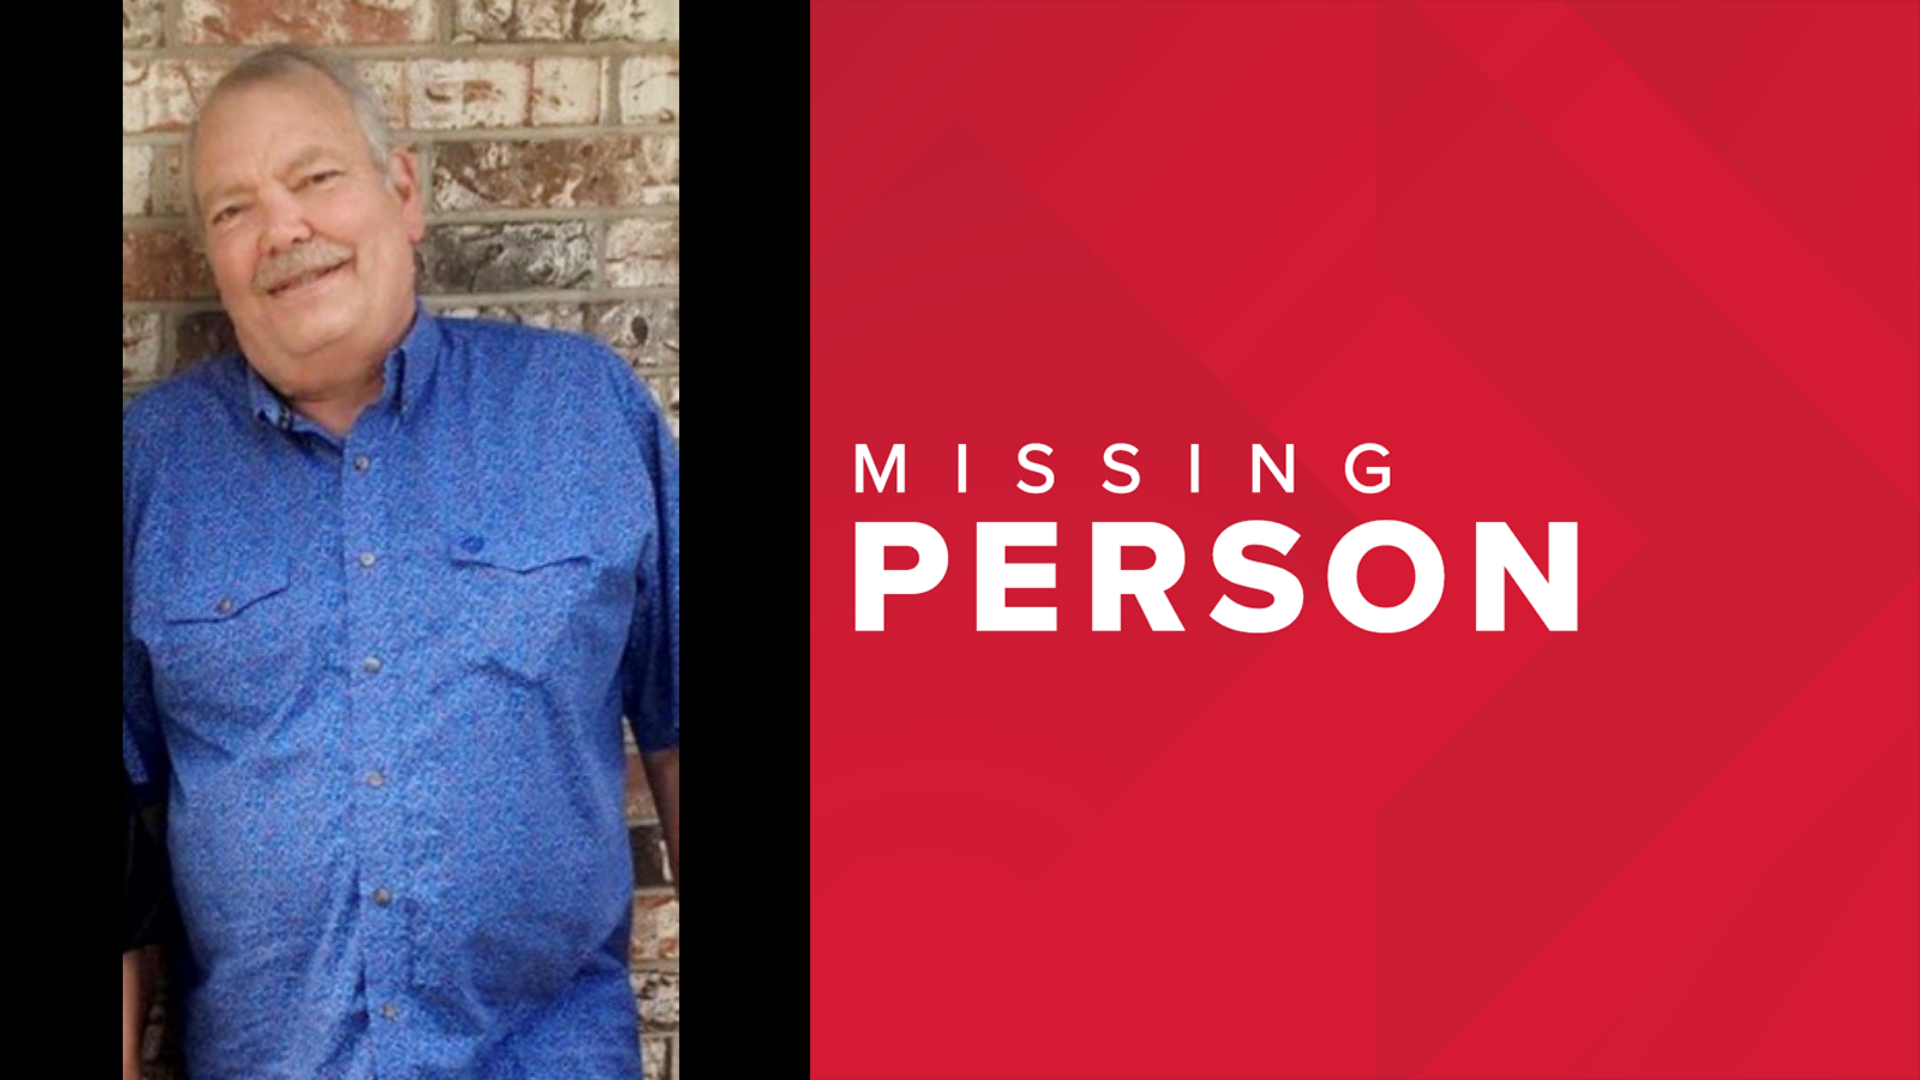 Jerry Loftin was last seen wearing a dark blue shirt, gray sweat pants and white shoes.